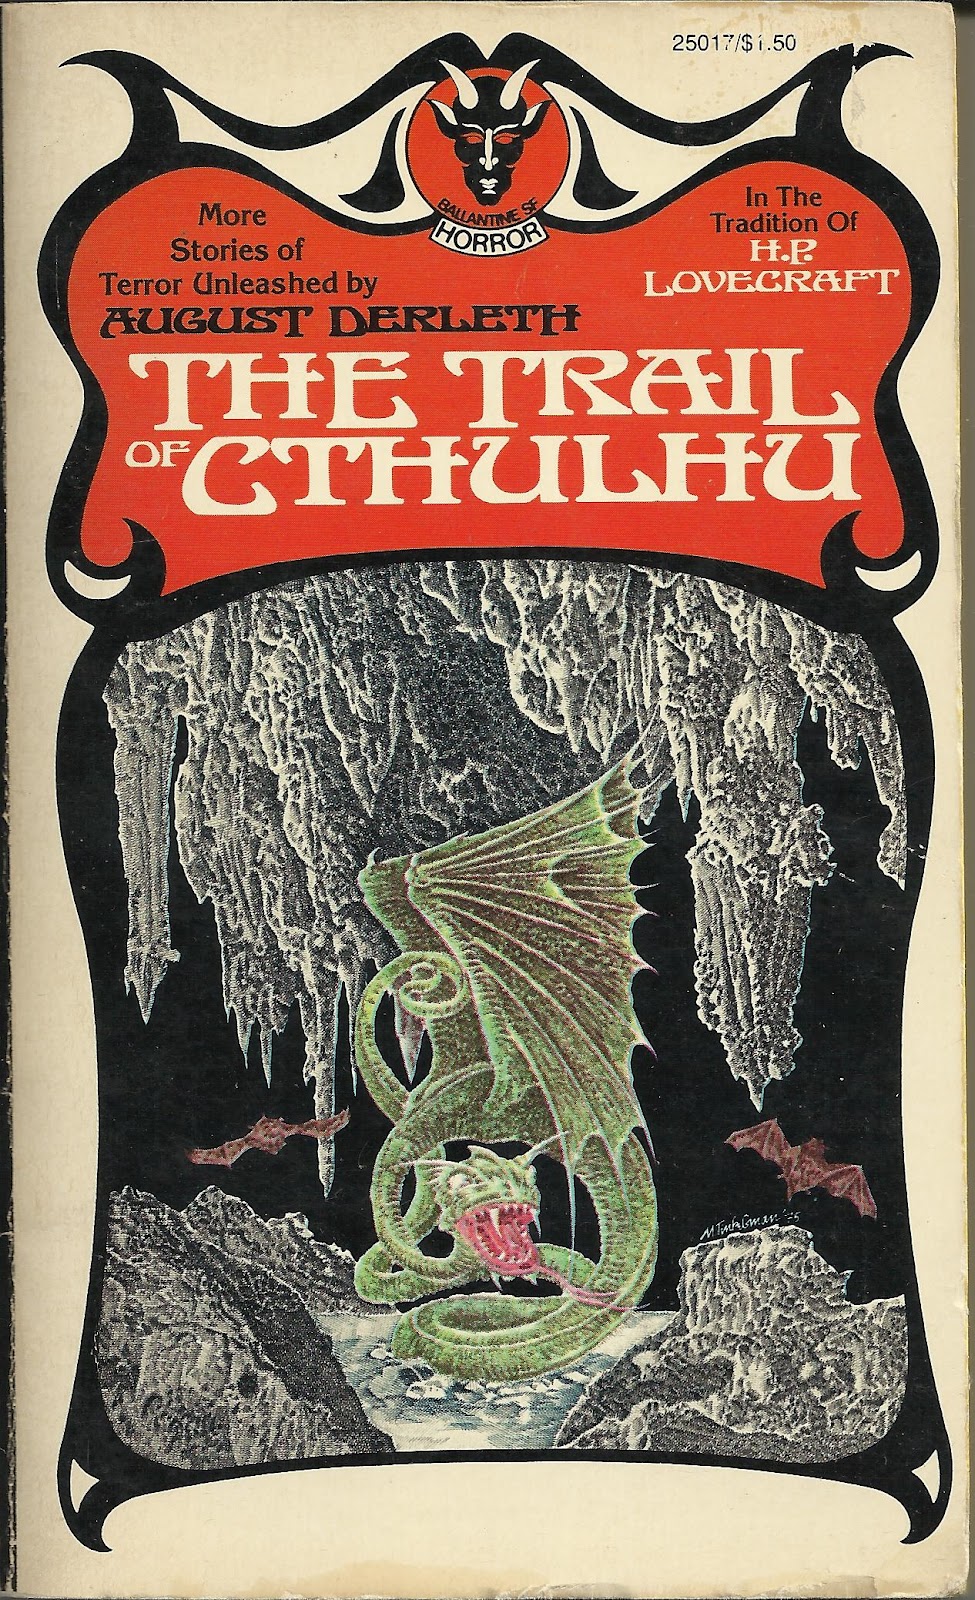 Murray Tinkelman - Cover for "The Trail Of Cthulhu"